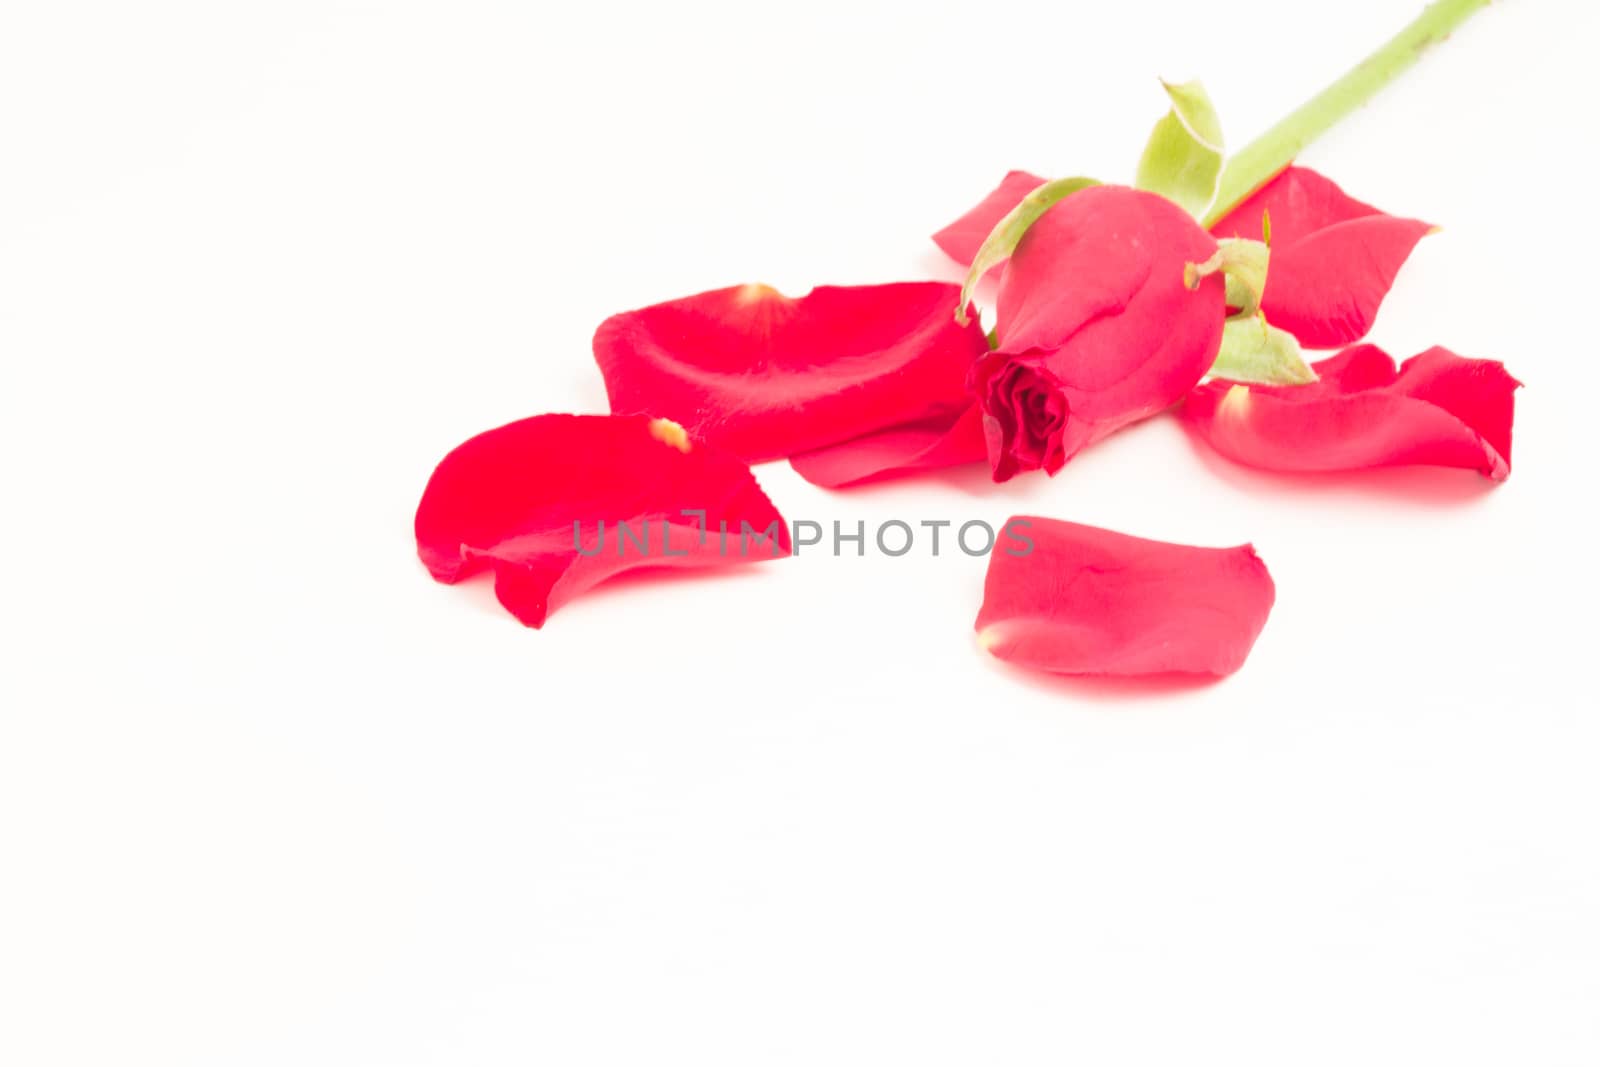 Pink rose with petals on white background